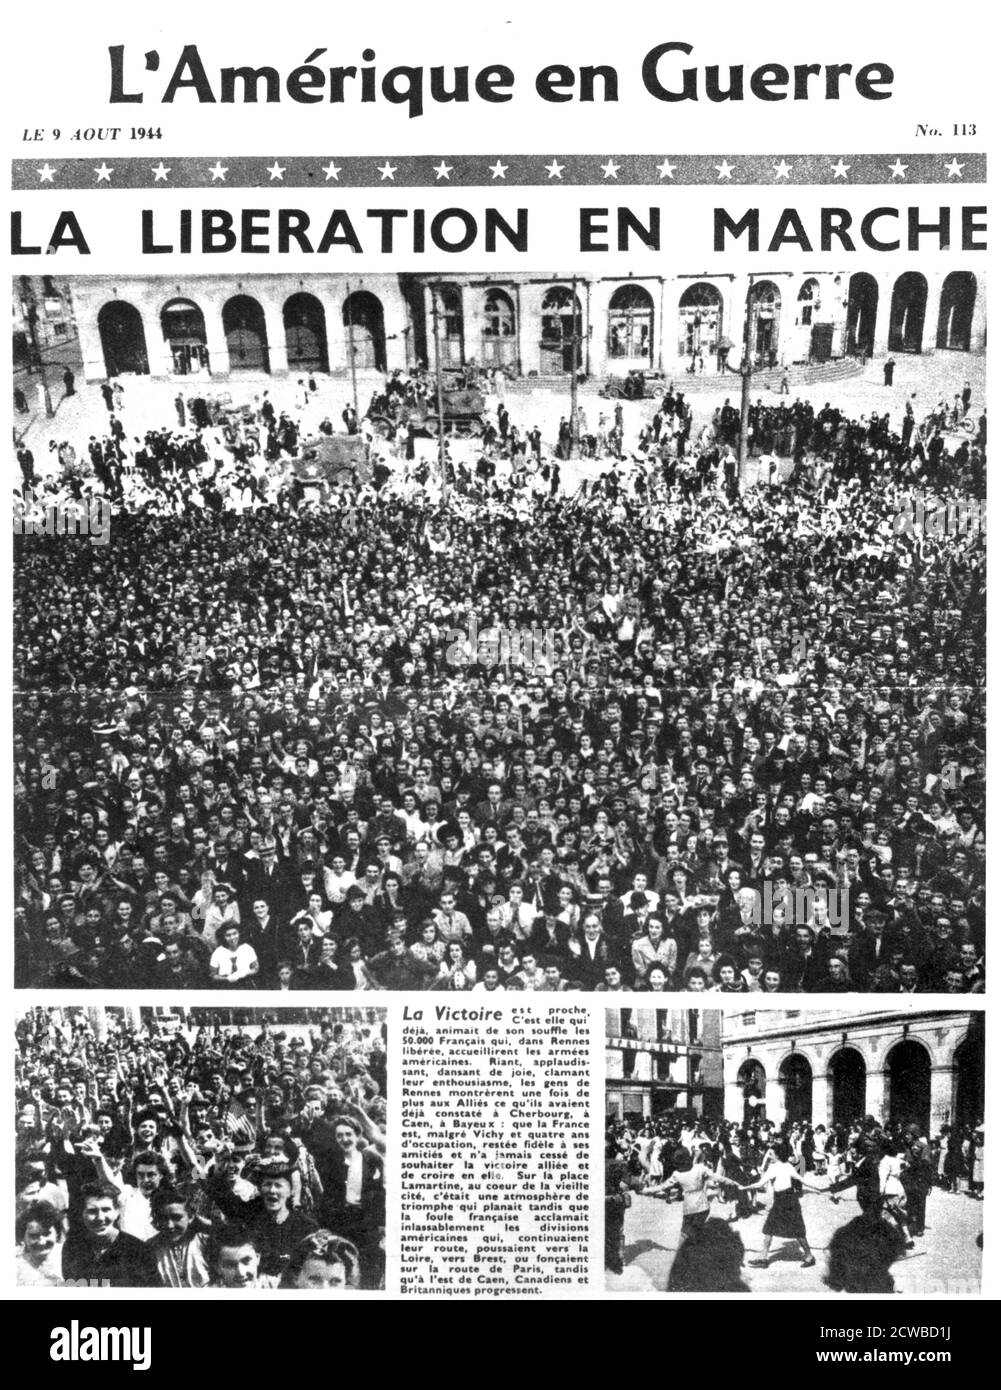 Front page of L'Amerique en Guerre newspaper, 9 August 1944. The story describes the progress of the liberation of France by the Allies, with photographs of large celebrating crowds in Rennes. The photographer is unknown. Stock Photo